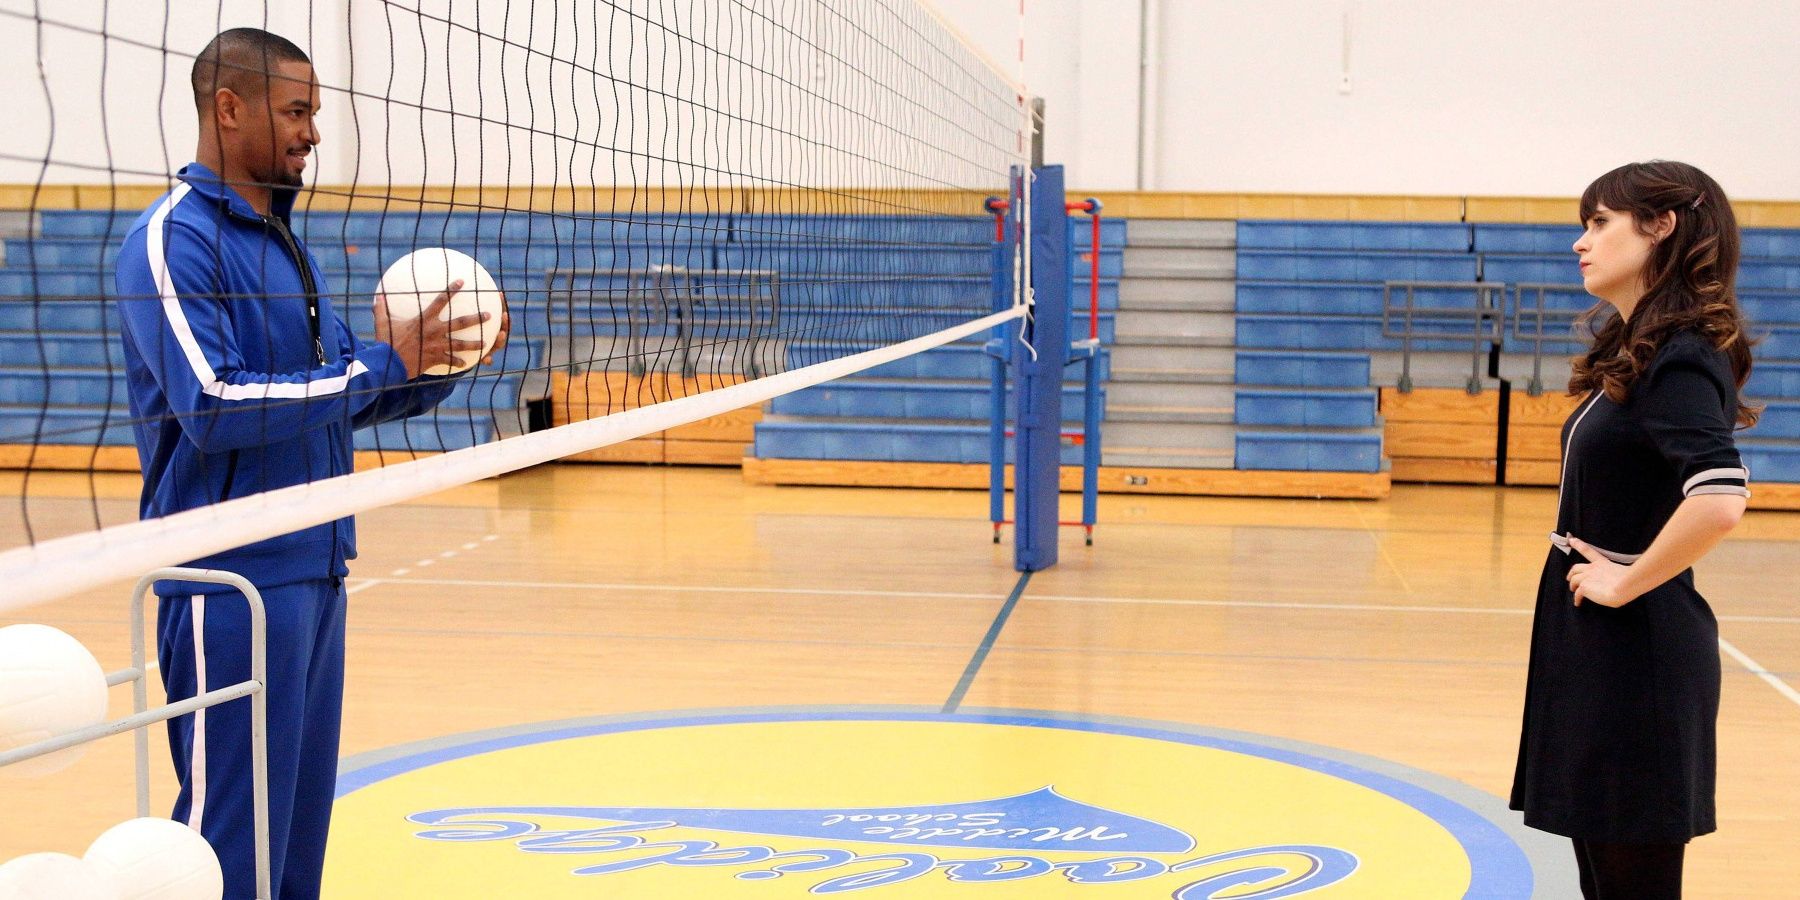 Coach holds a volleyball while Jess stands on the other side of the net